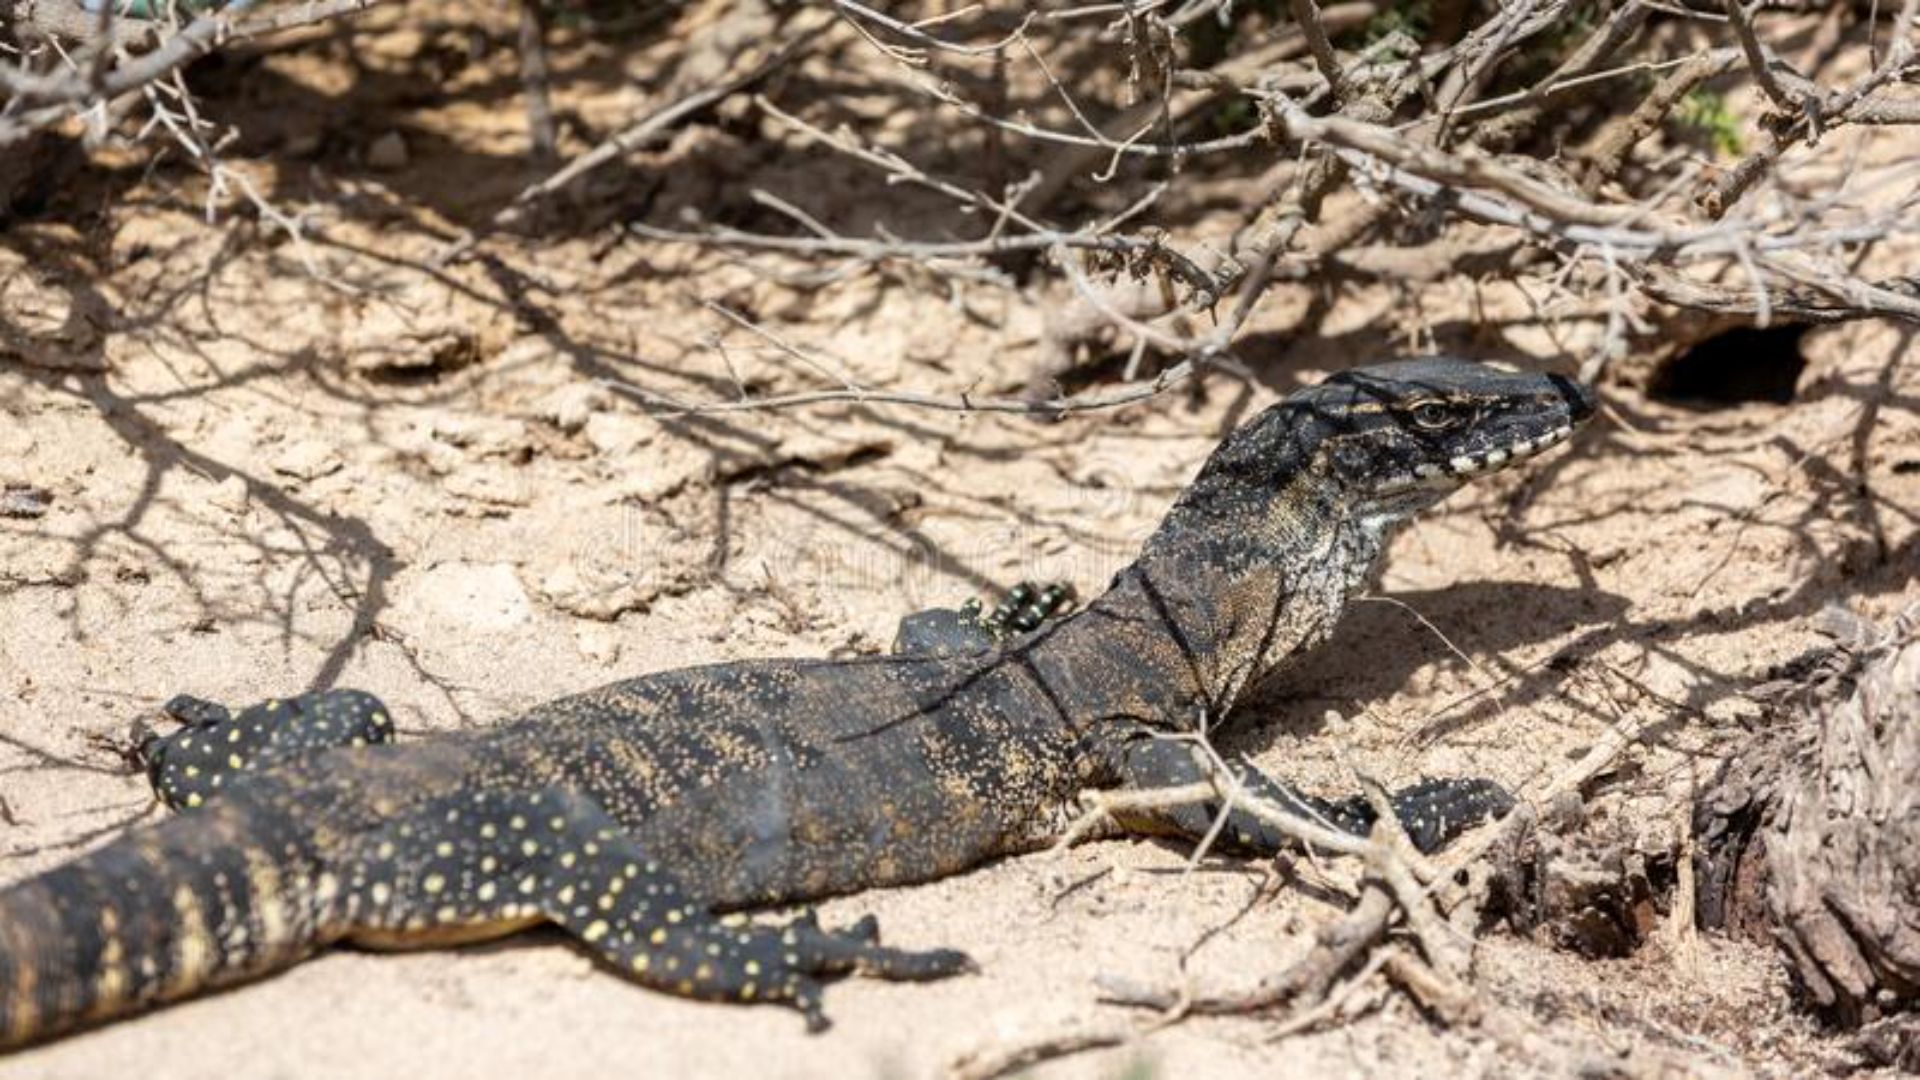 PhD student finds threatened goanna in south-west NSW